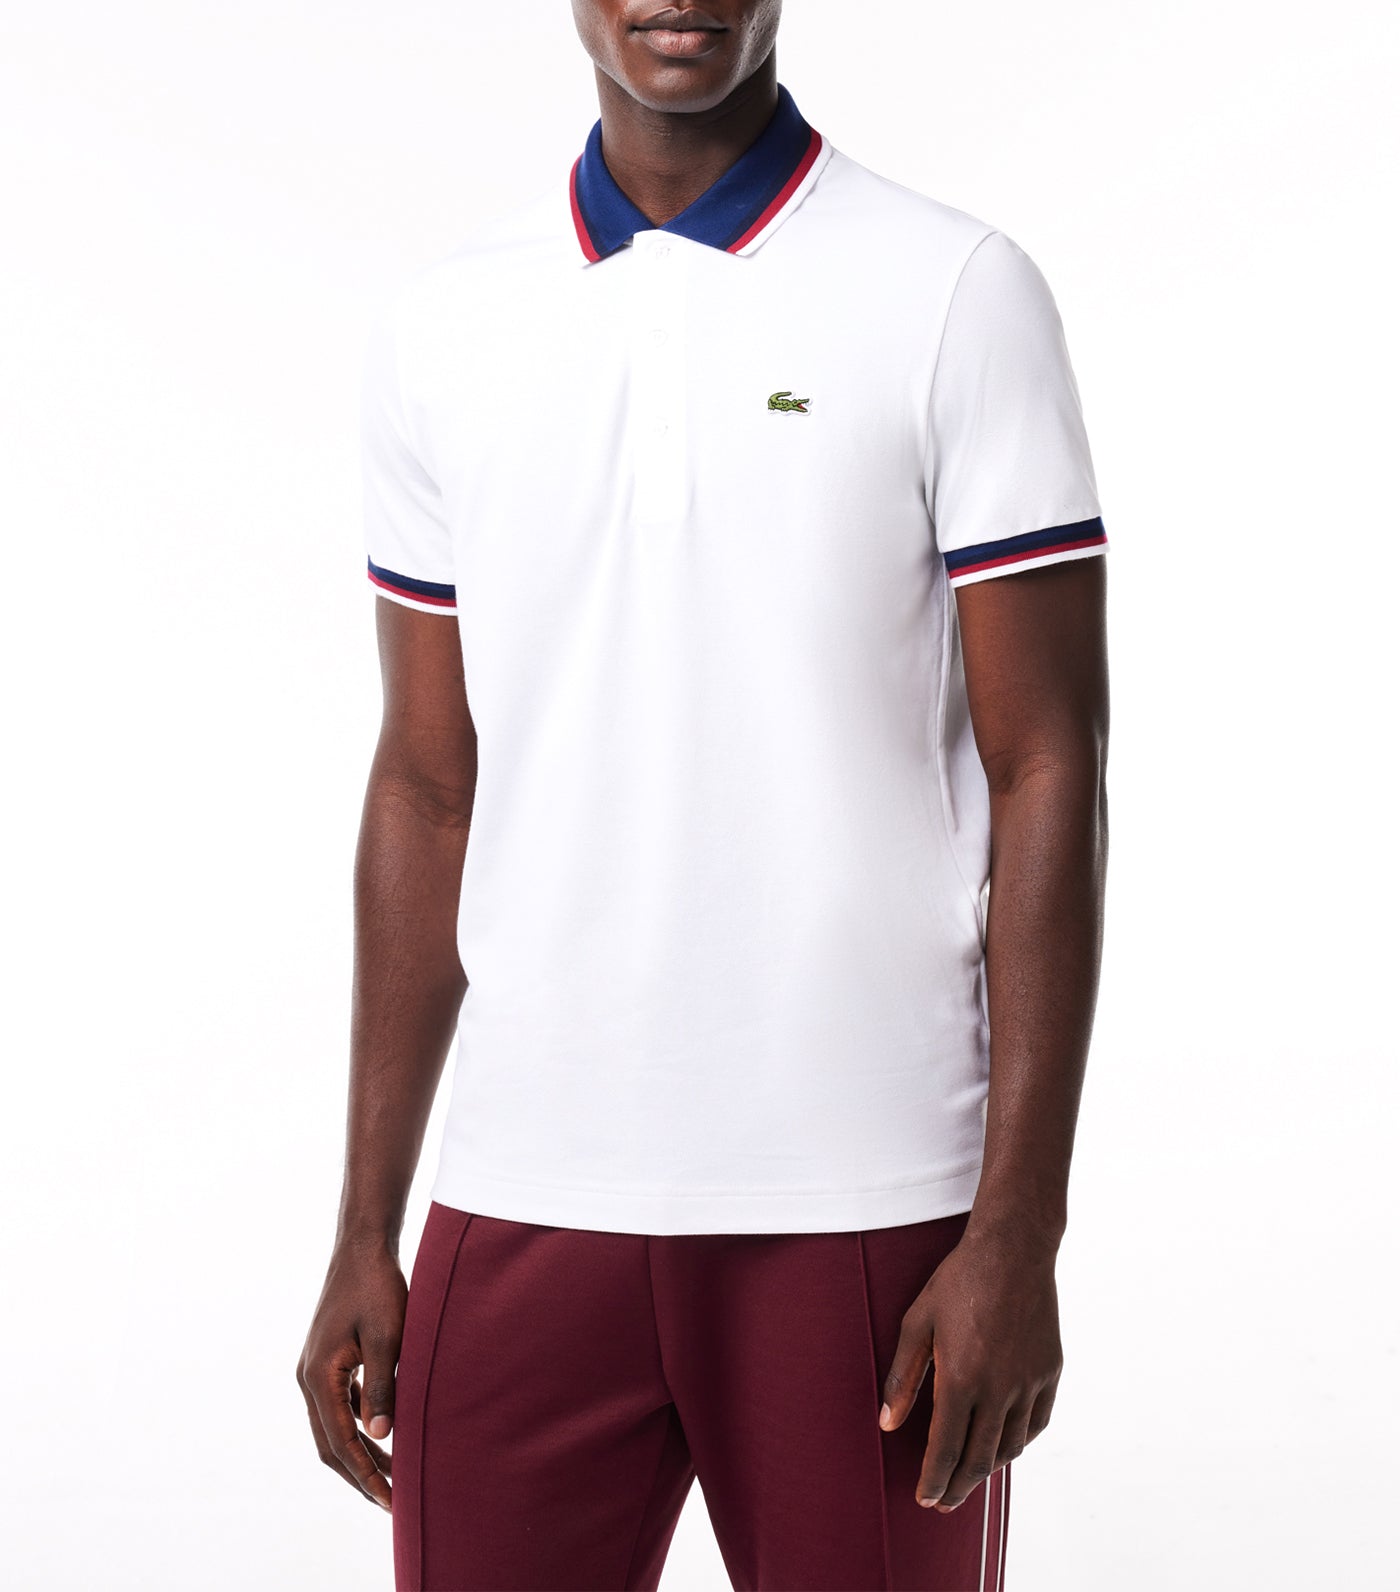 Contrast Collar and Cuff Stretch Polo Shirt White